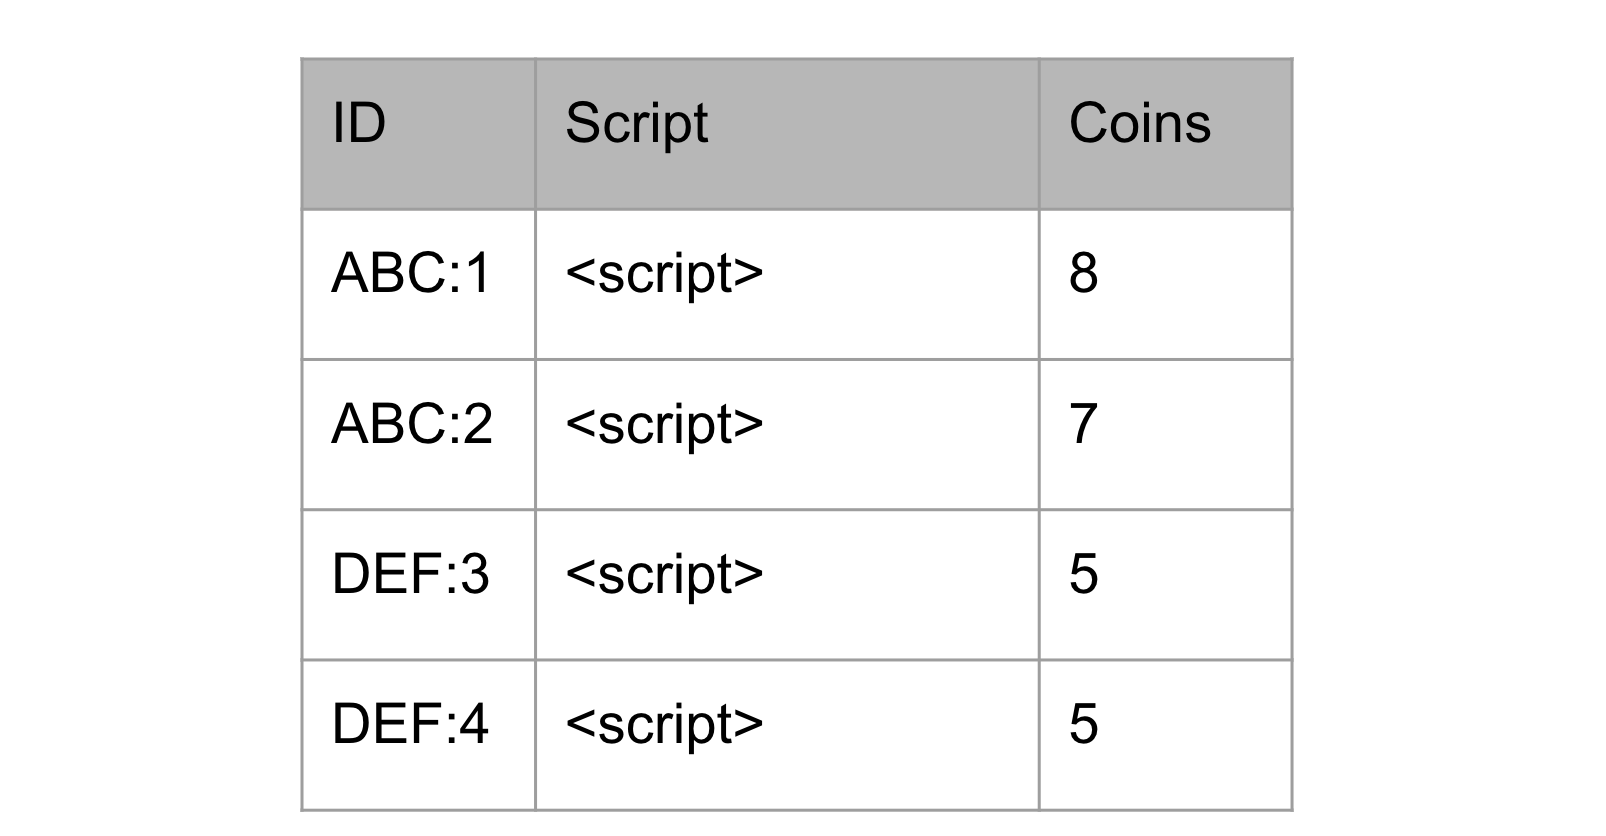 Figure 1: An example of the Bitcoin database